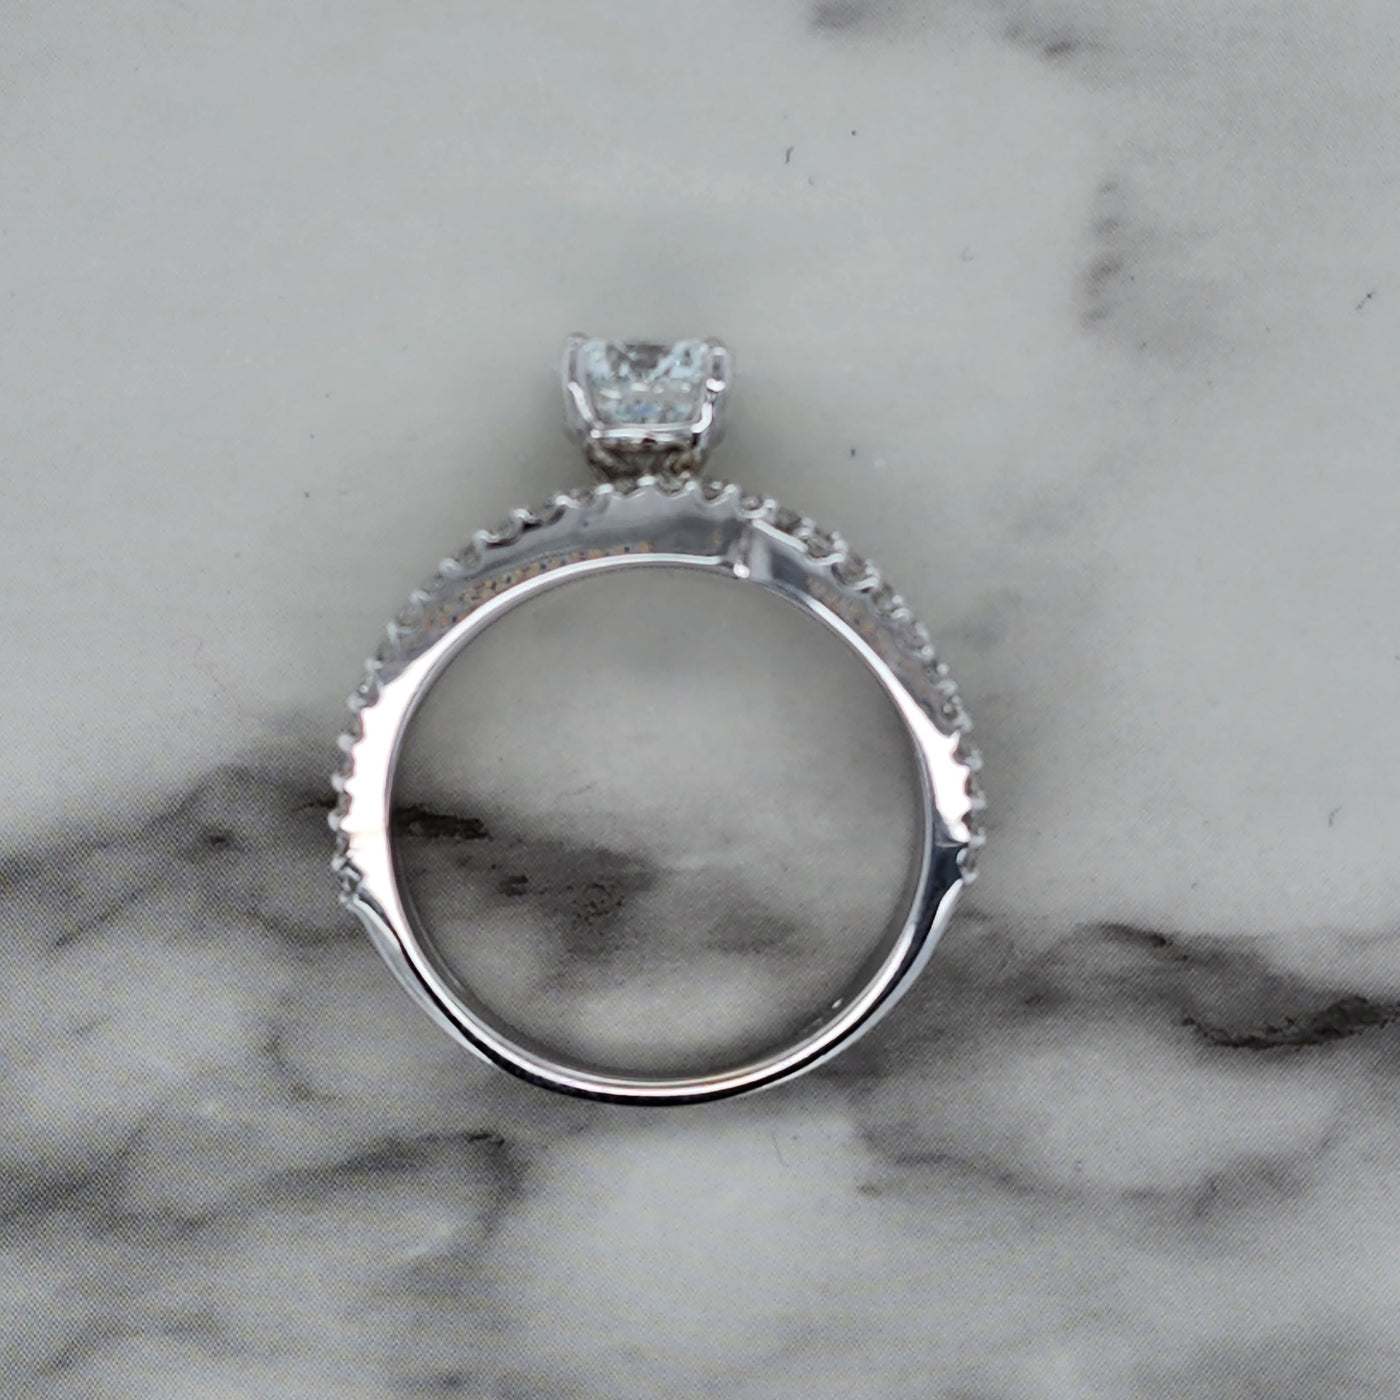 White Gold Engagement Ring With Round Center Stone and Asymmetrical Band